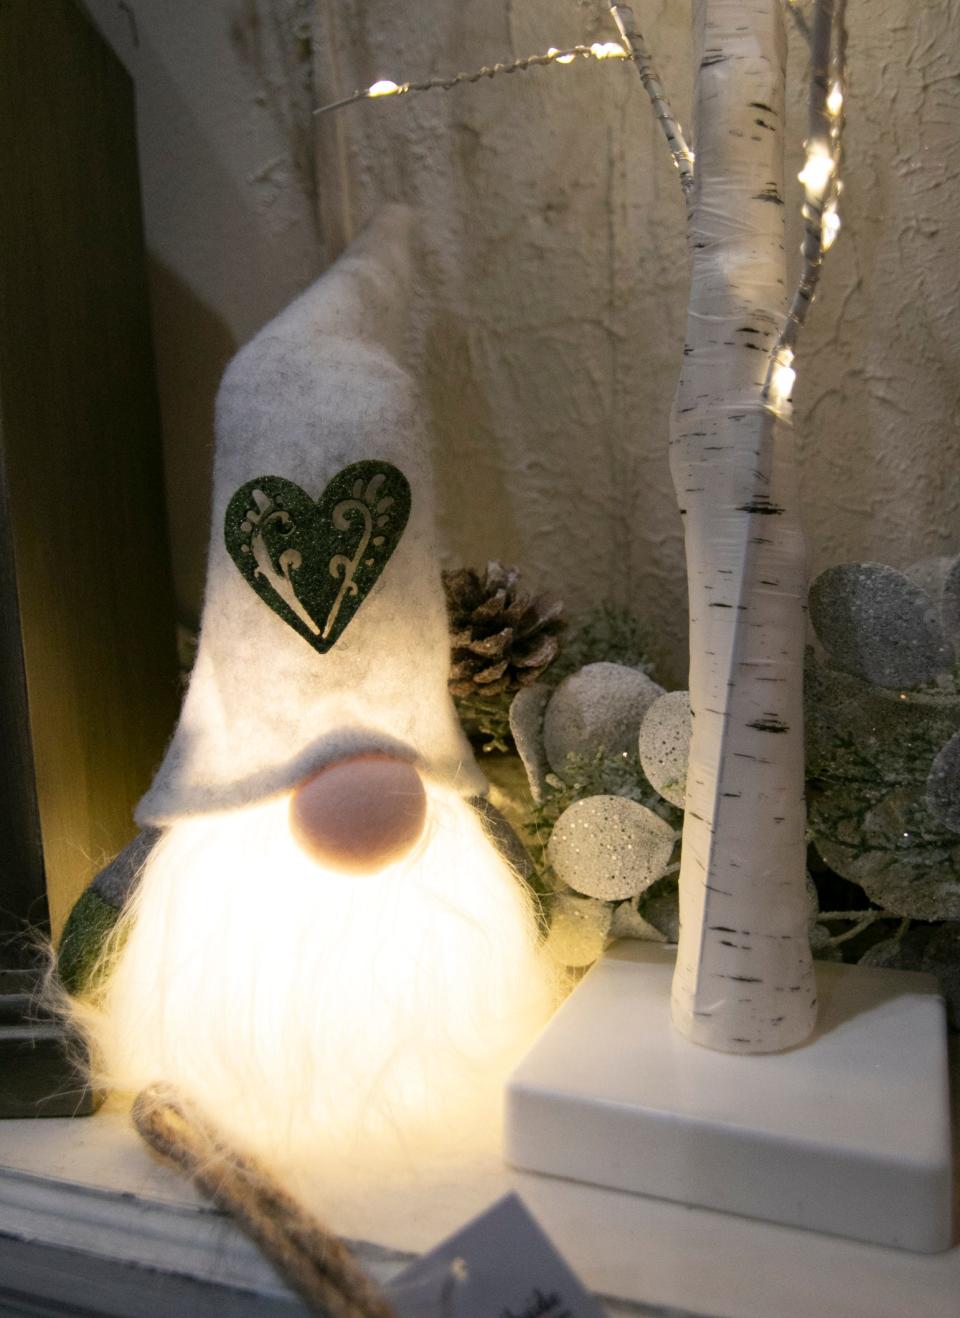 Gnomes are a popular gift found at That's What She Shed Boutique in Hartland Township, shown Tuesday, Nov. 23, 2021.